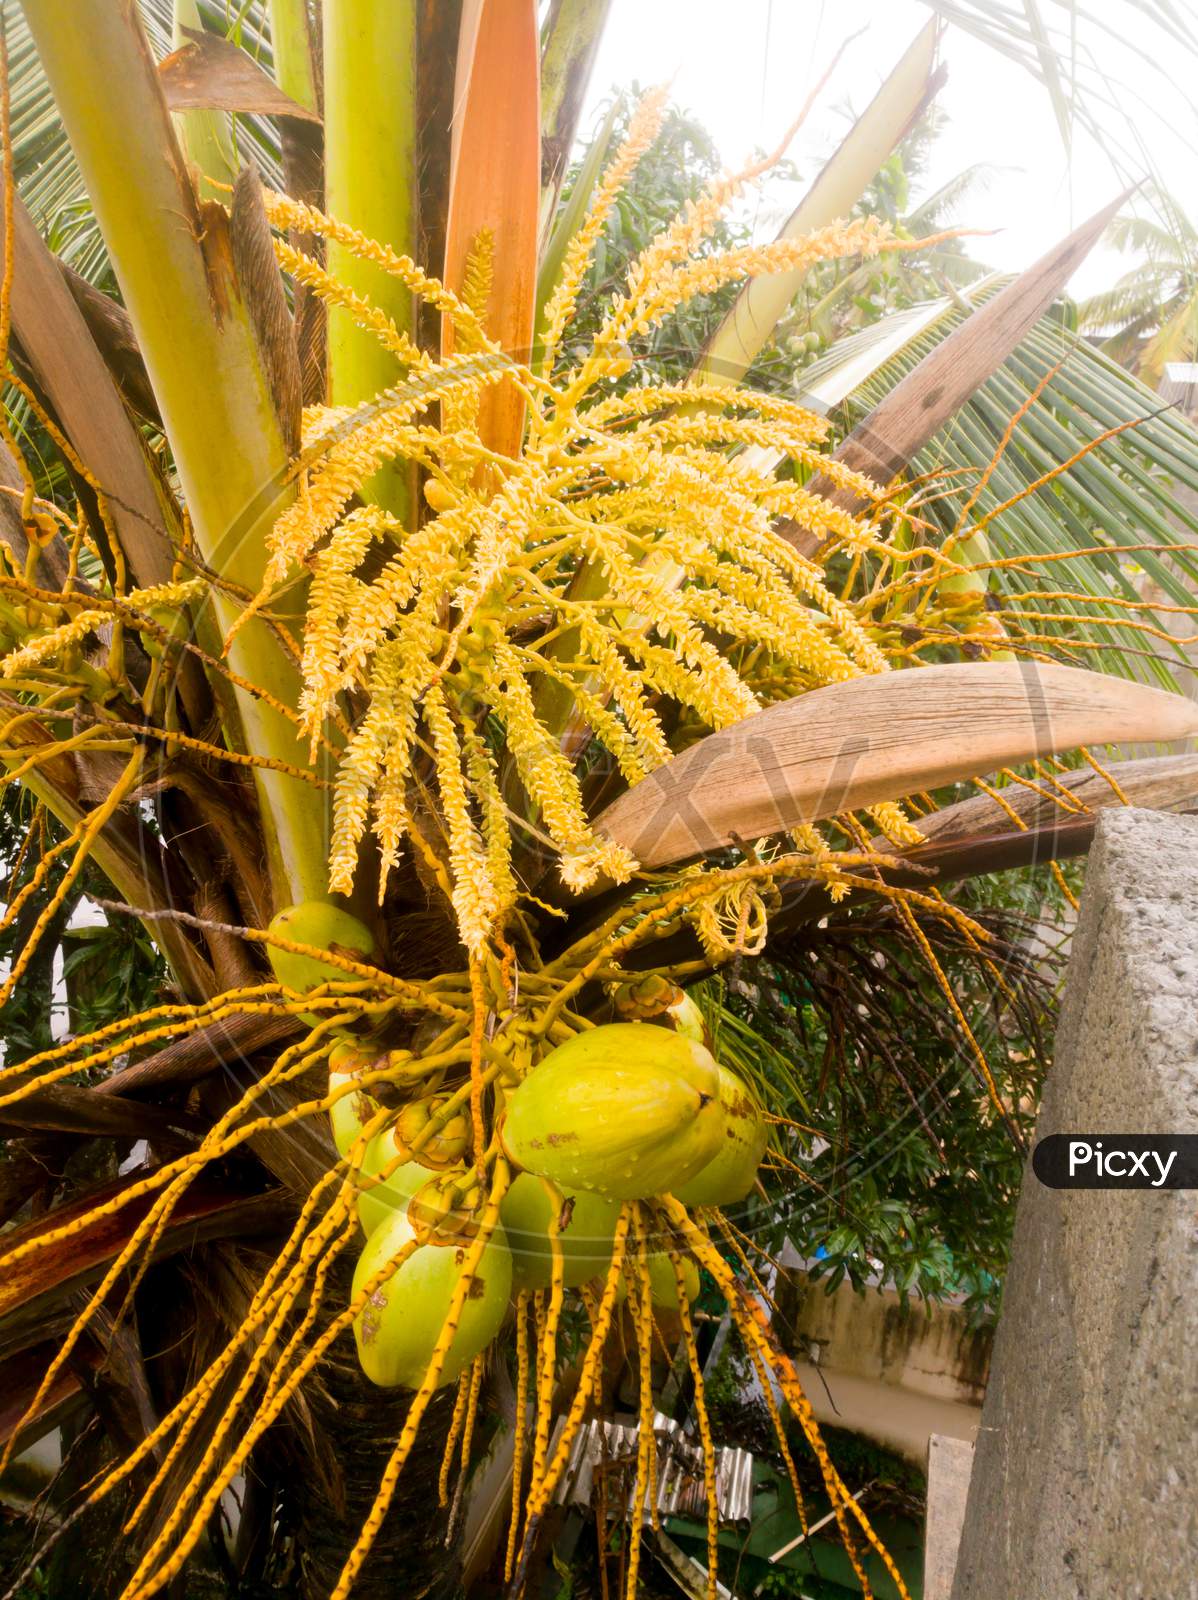 Full View Of The Coconut Tree At Top With Tender Coconuts And Flowers.